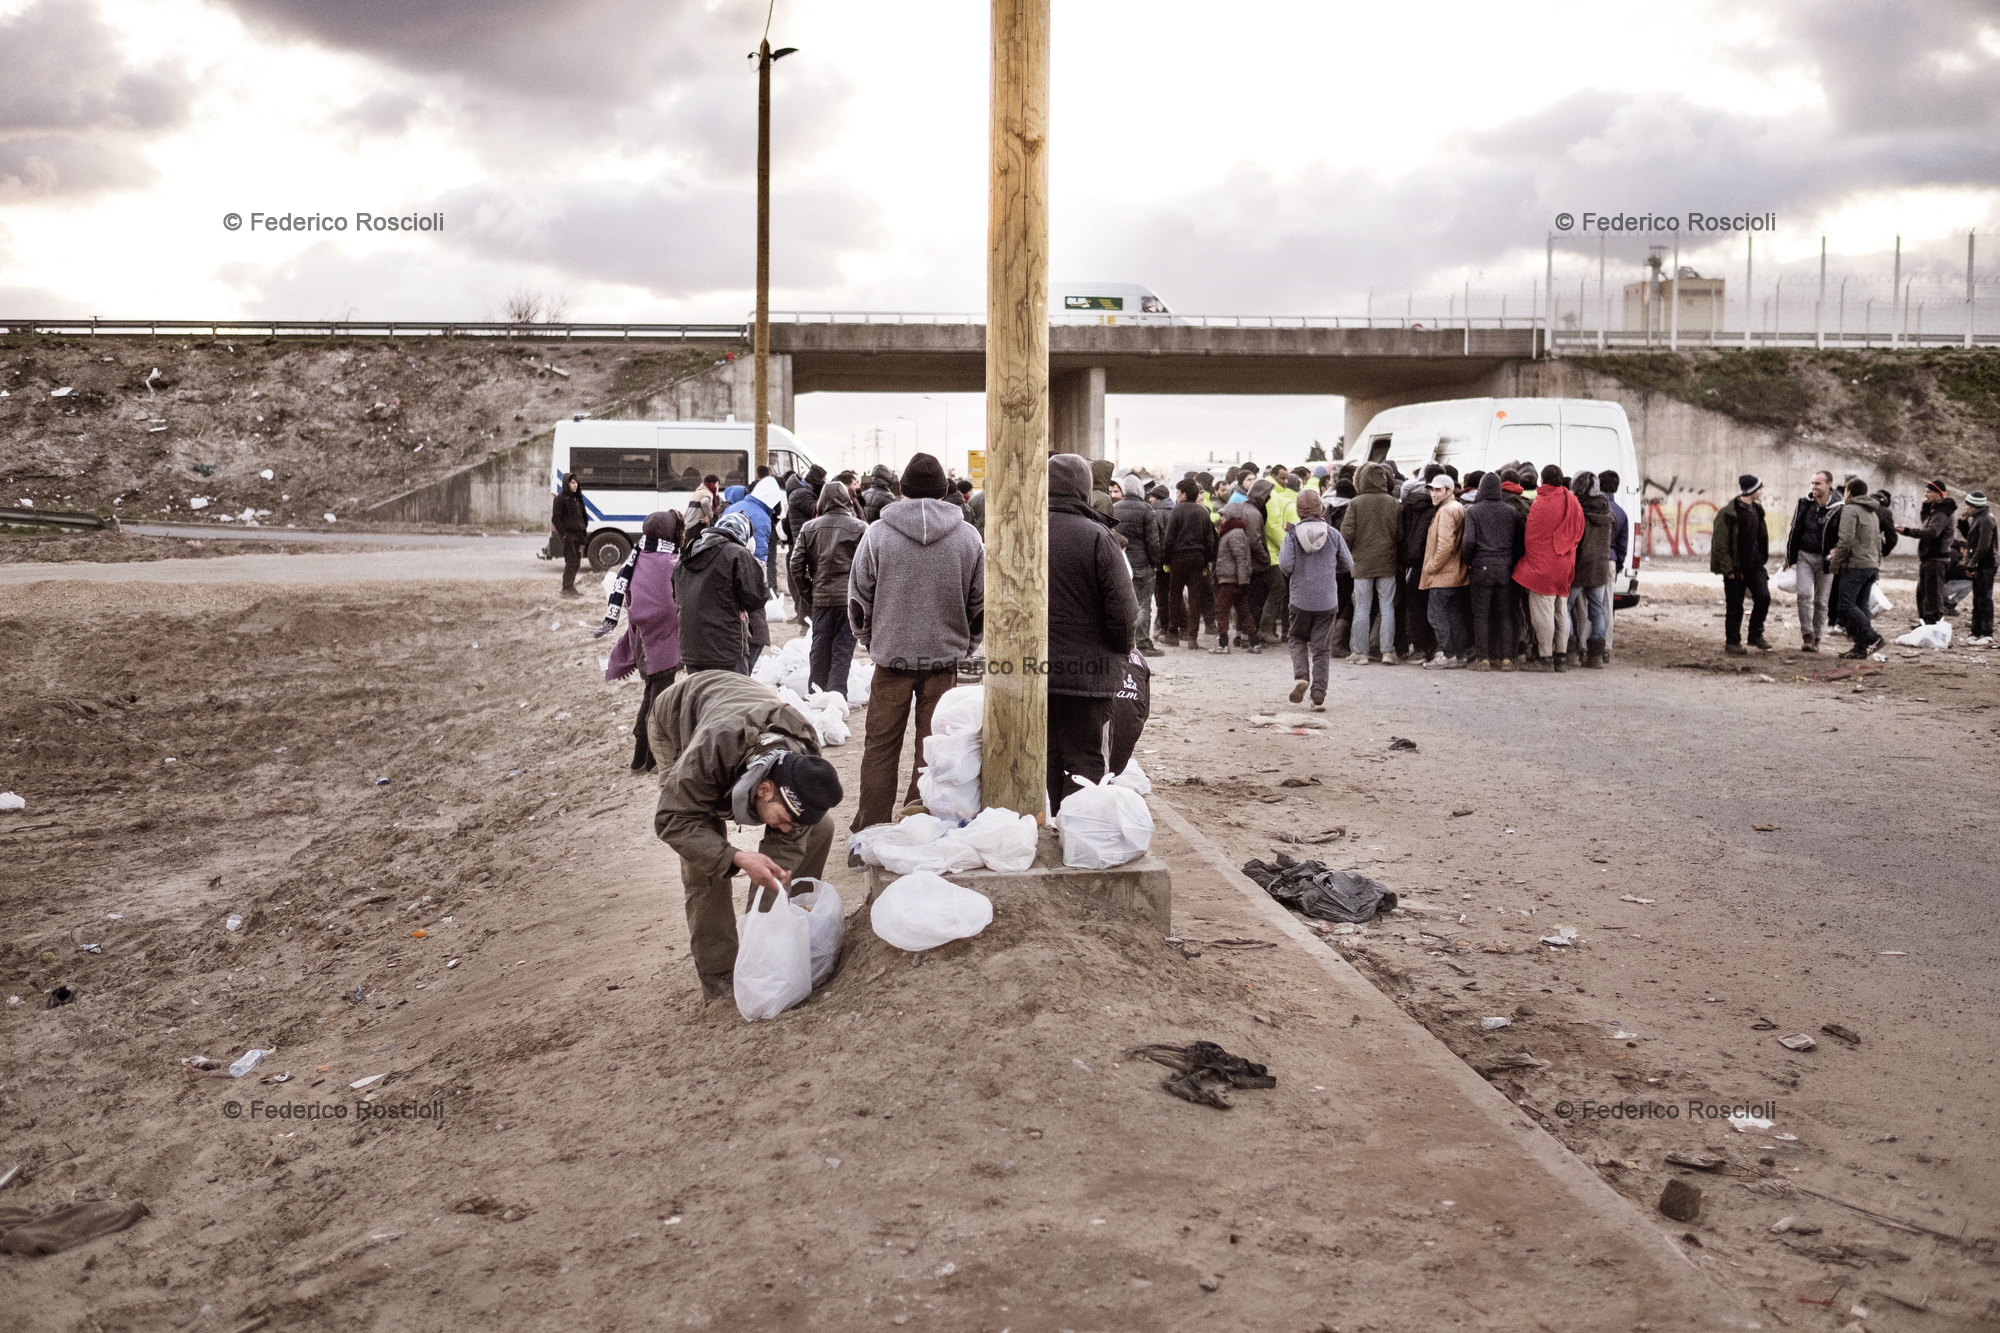 Calais, France. February 28, 2016. Food distribution at the camp entrance. Not all the migrants join in for distribution because they are wealthy and able to buy food.